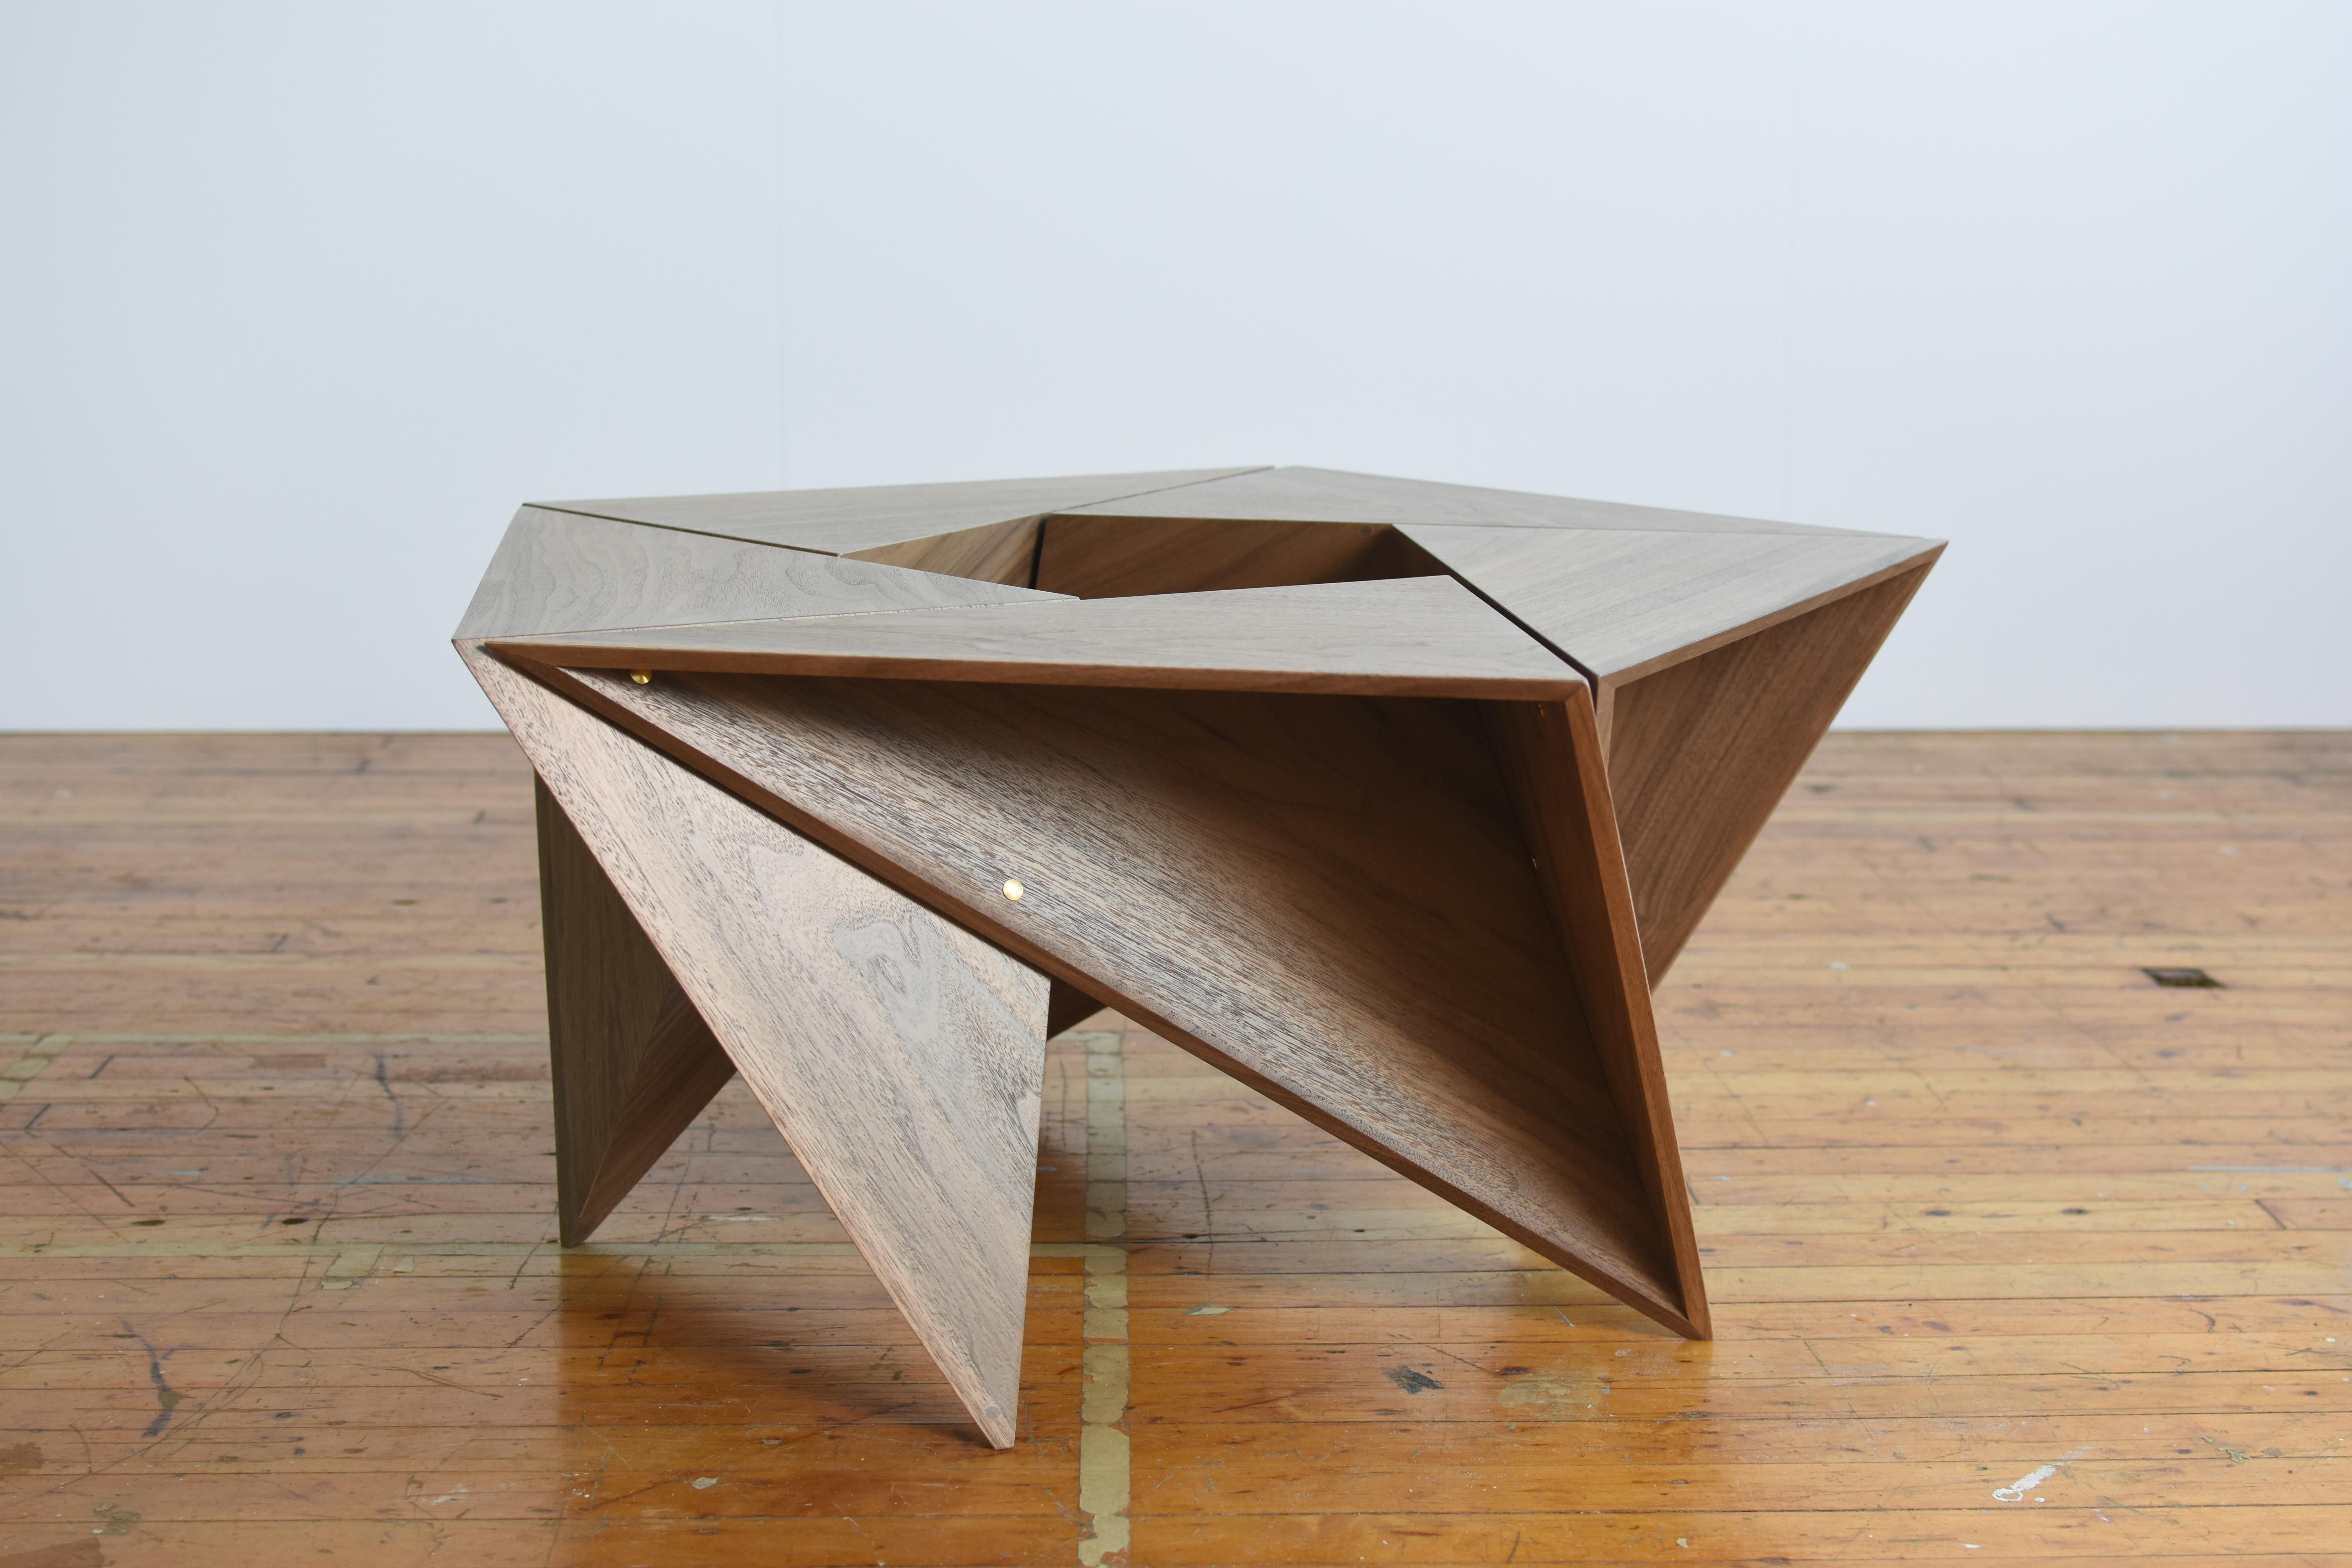 This pentagonal table is comprised of 5 identical open faced tetrahedron. Held together with brass barrel bolts, the unit can be disassembled and nested for compact shipping.

Picture here is a walnut plywood with solid edging edition.